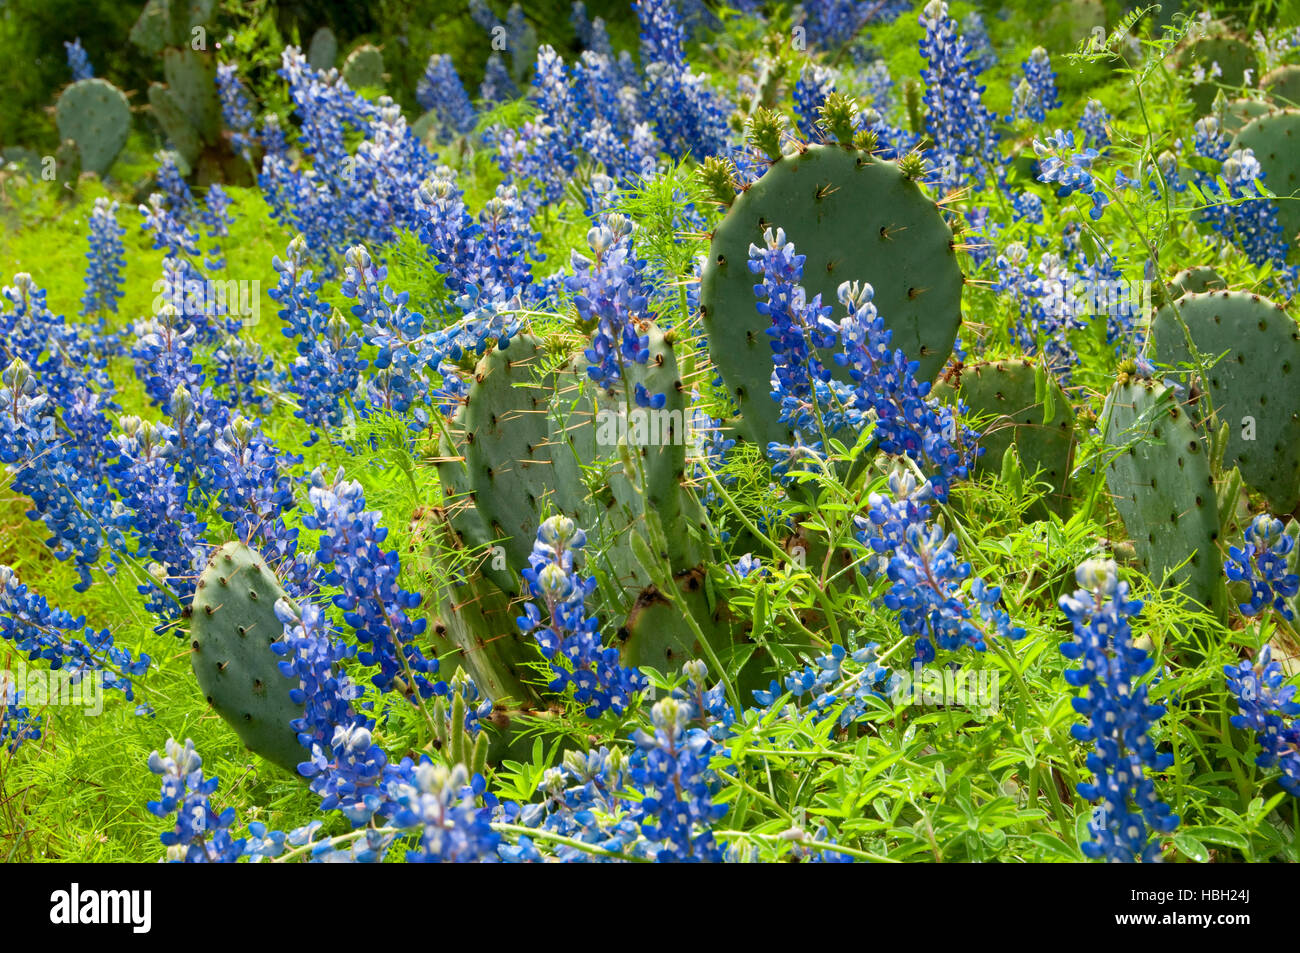 Texas bluebonnet with prickly pear, Inks Lake State Park, Texas Stock Photo